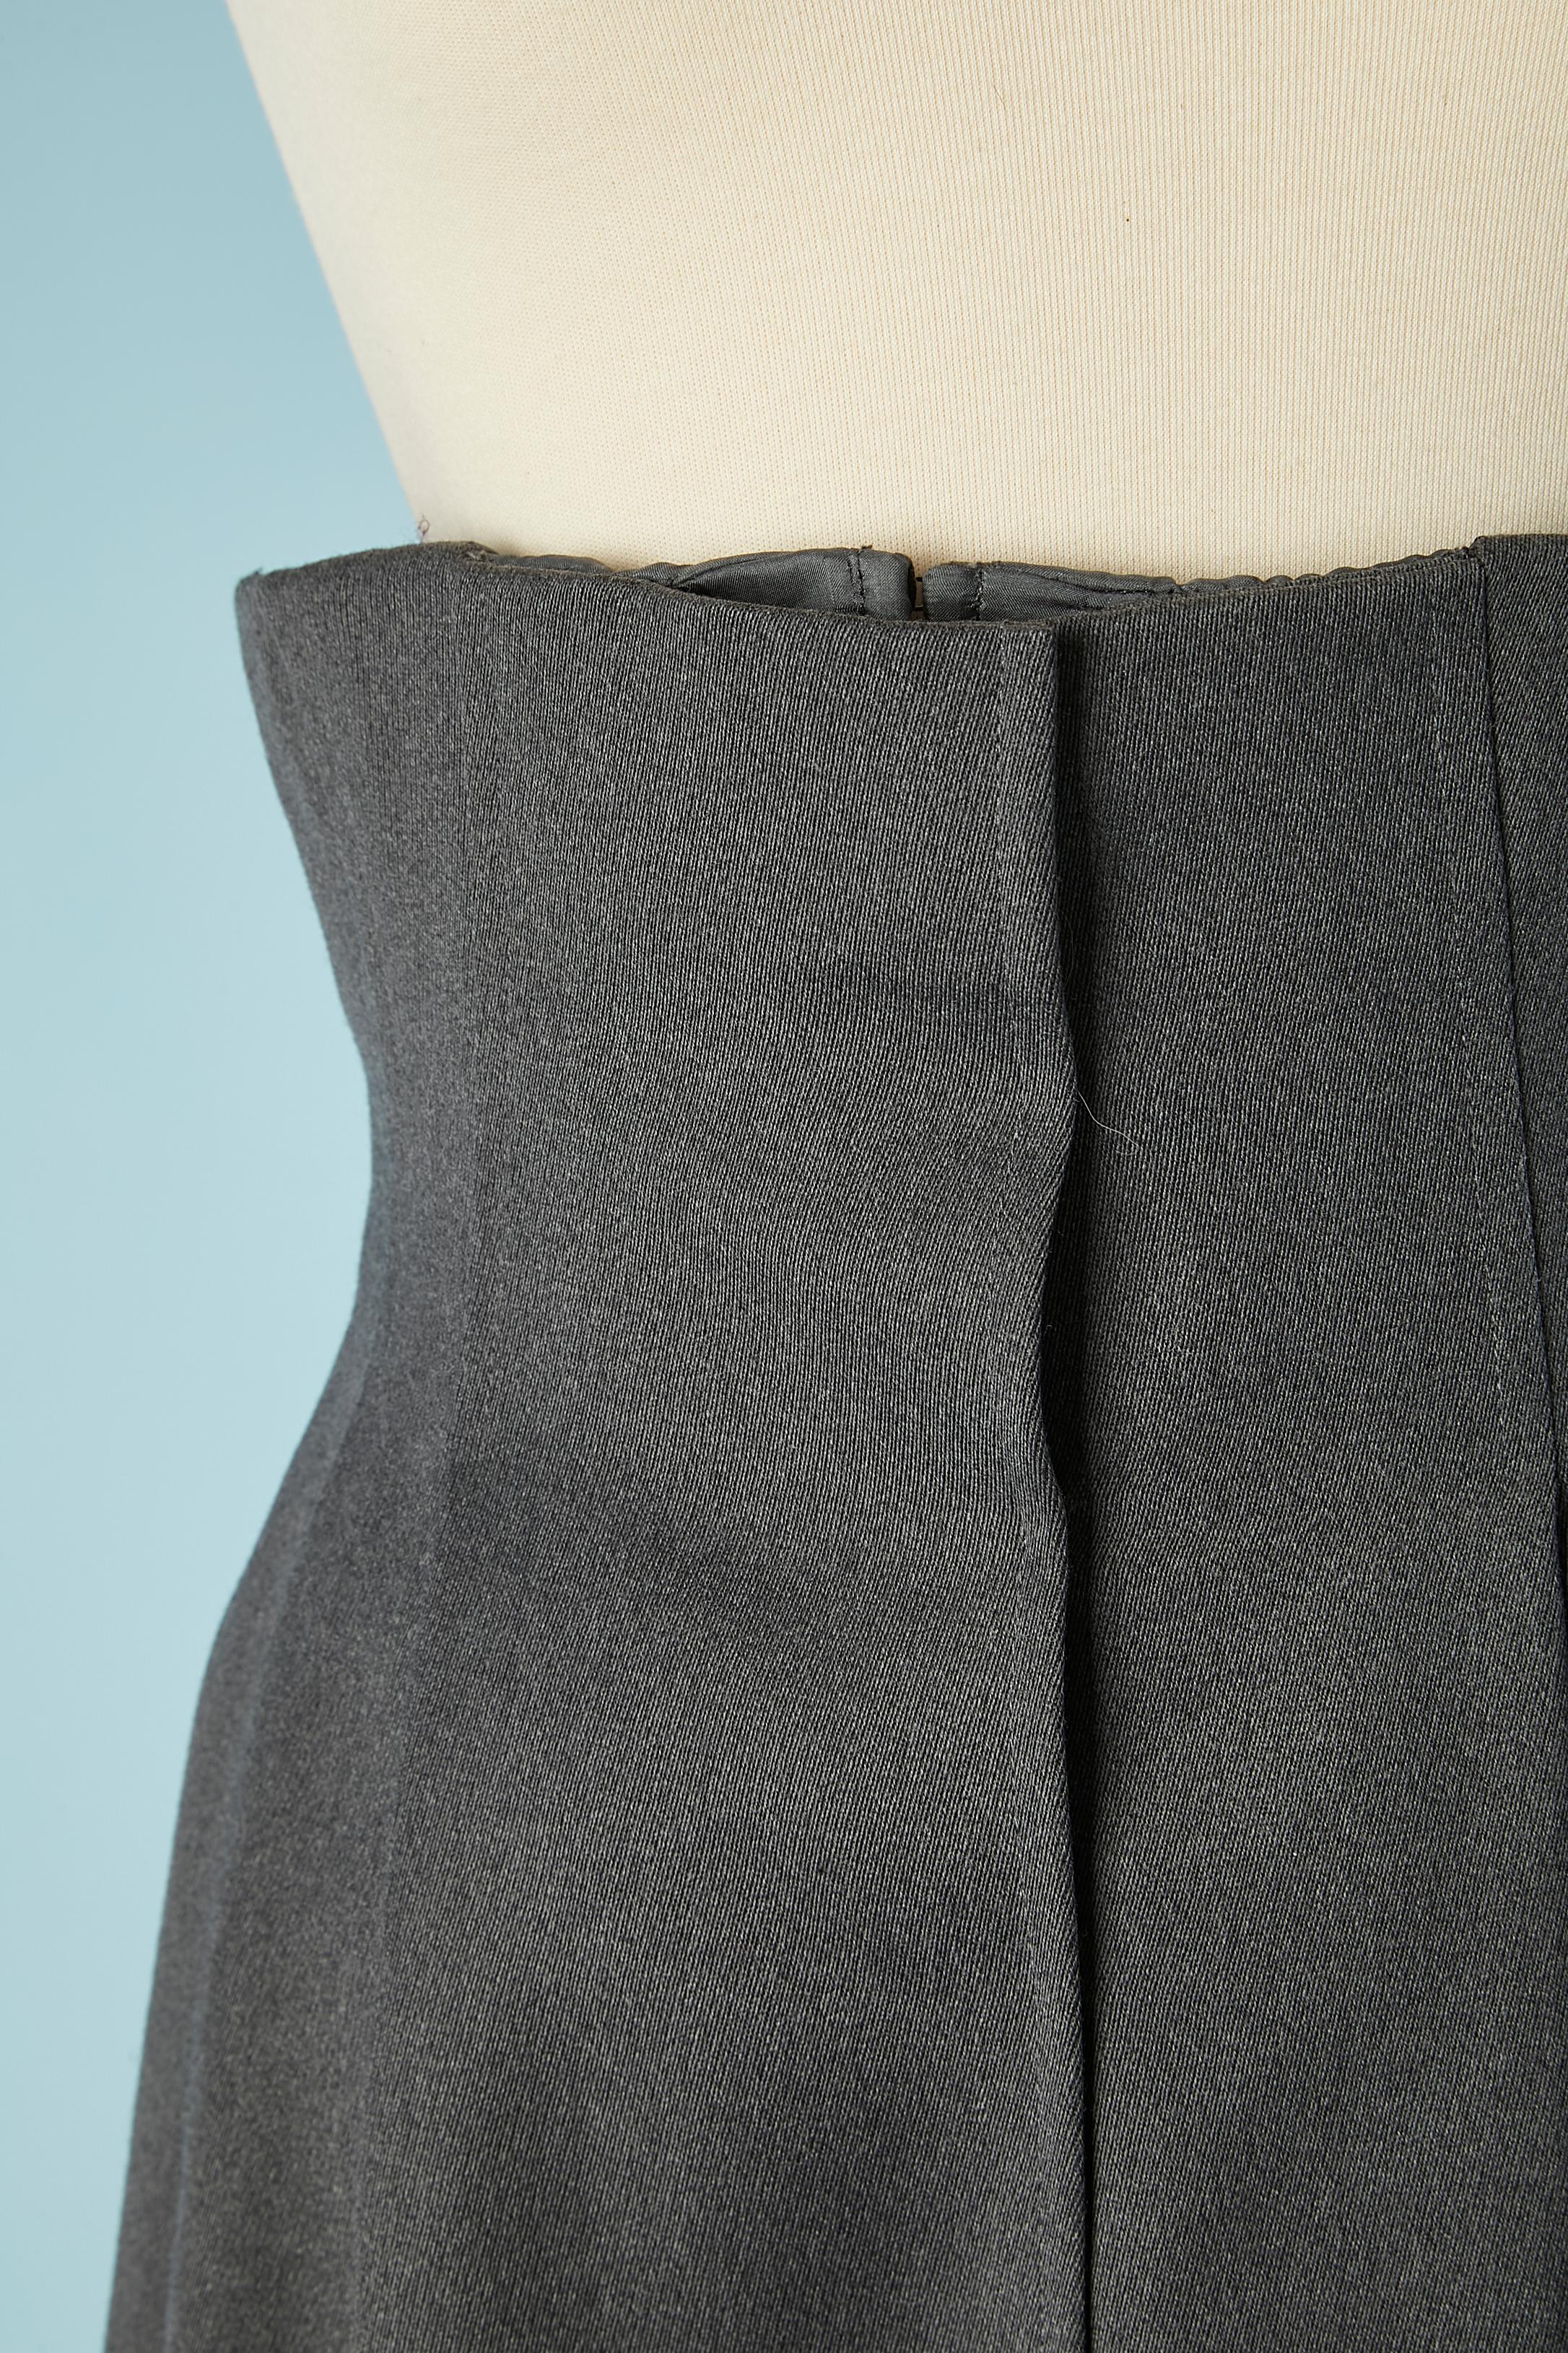 Grey wool high-waisted trouser. Waist boned corset lining  close with zip . Zip hook&eye and snaps in the middle front. Pockets on both side.
Size M 